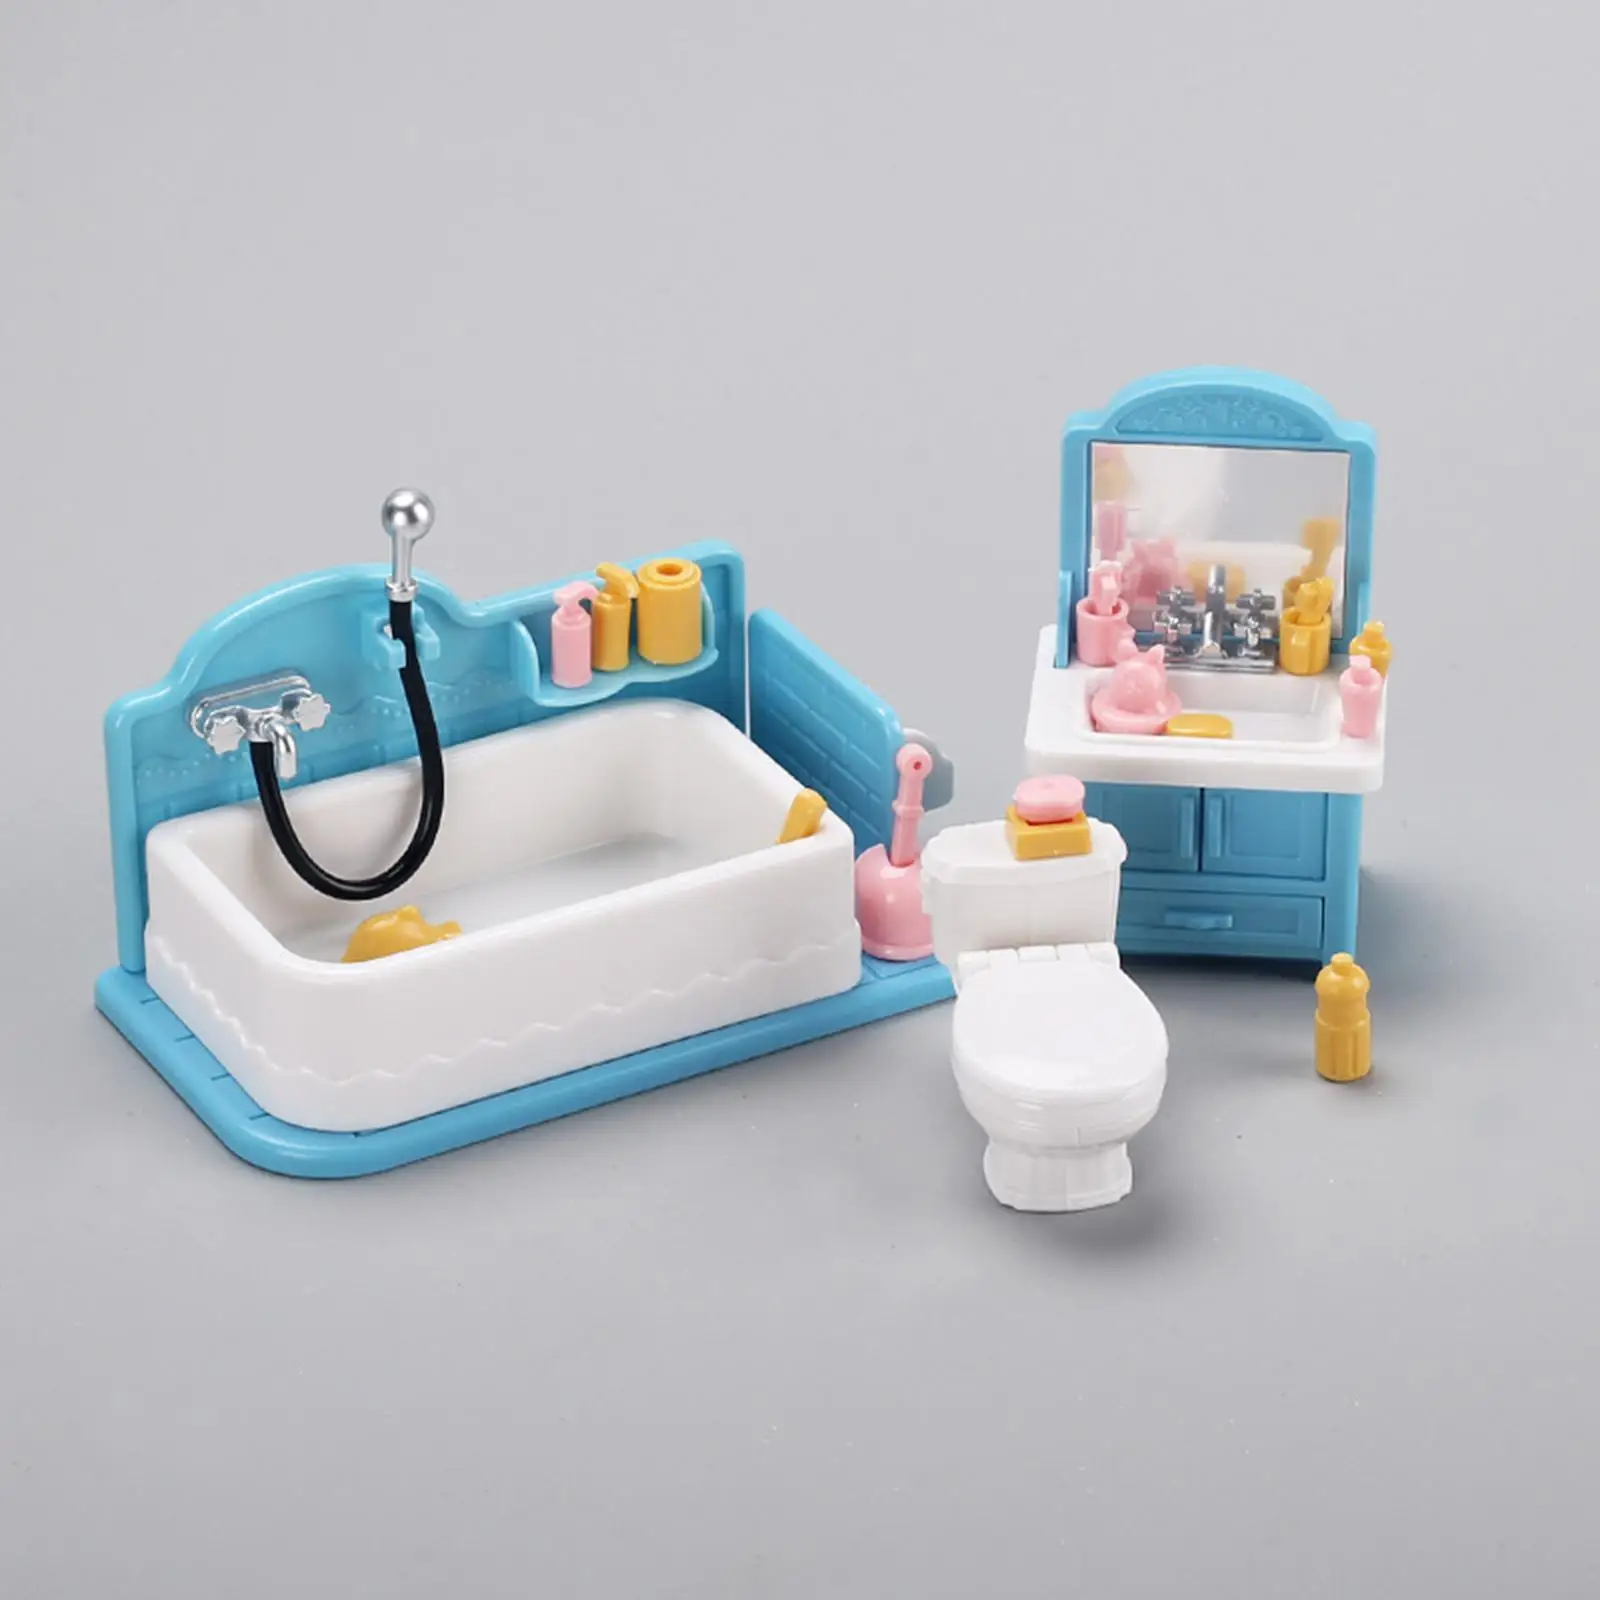 1/12 Dollhouse Bathroom Set Pretend Play Toy Ornament Playset Miniature Furniture Toys with Accessories Doll House Decorations